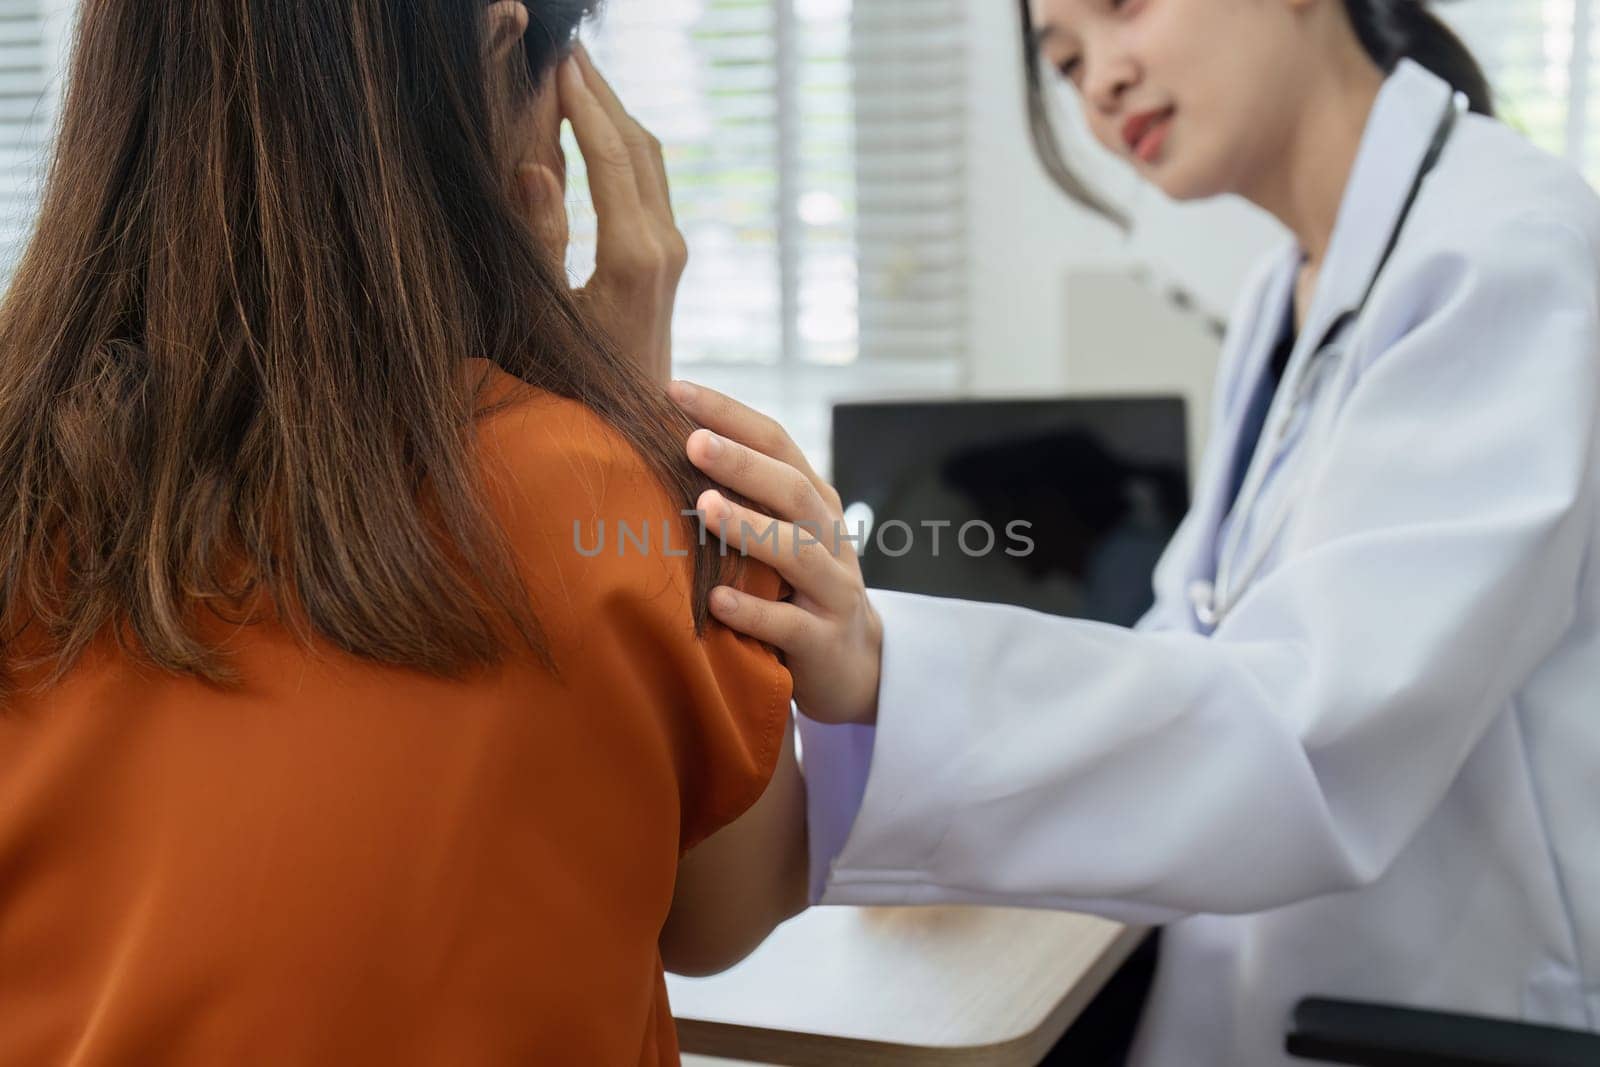 doctor comfort the patient holding shoulder, showing empathy to patient, encouraging patient by itchaznong